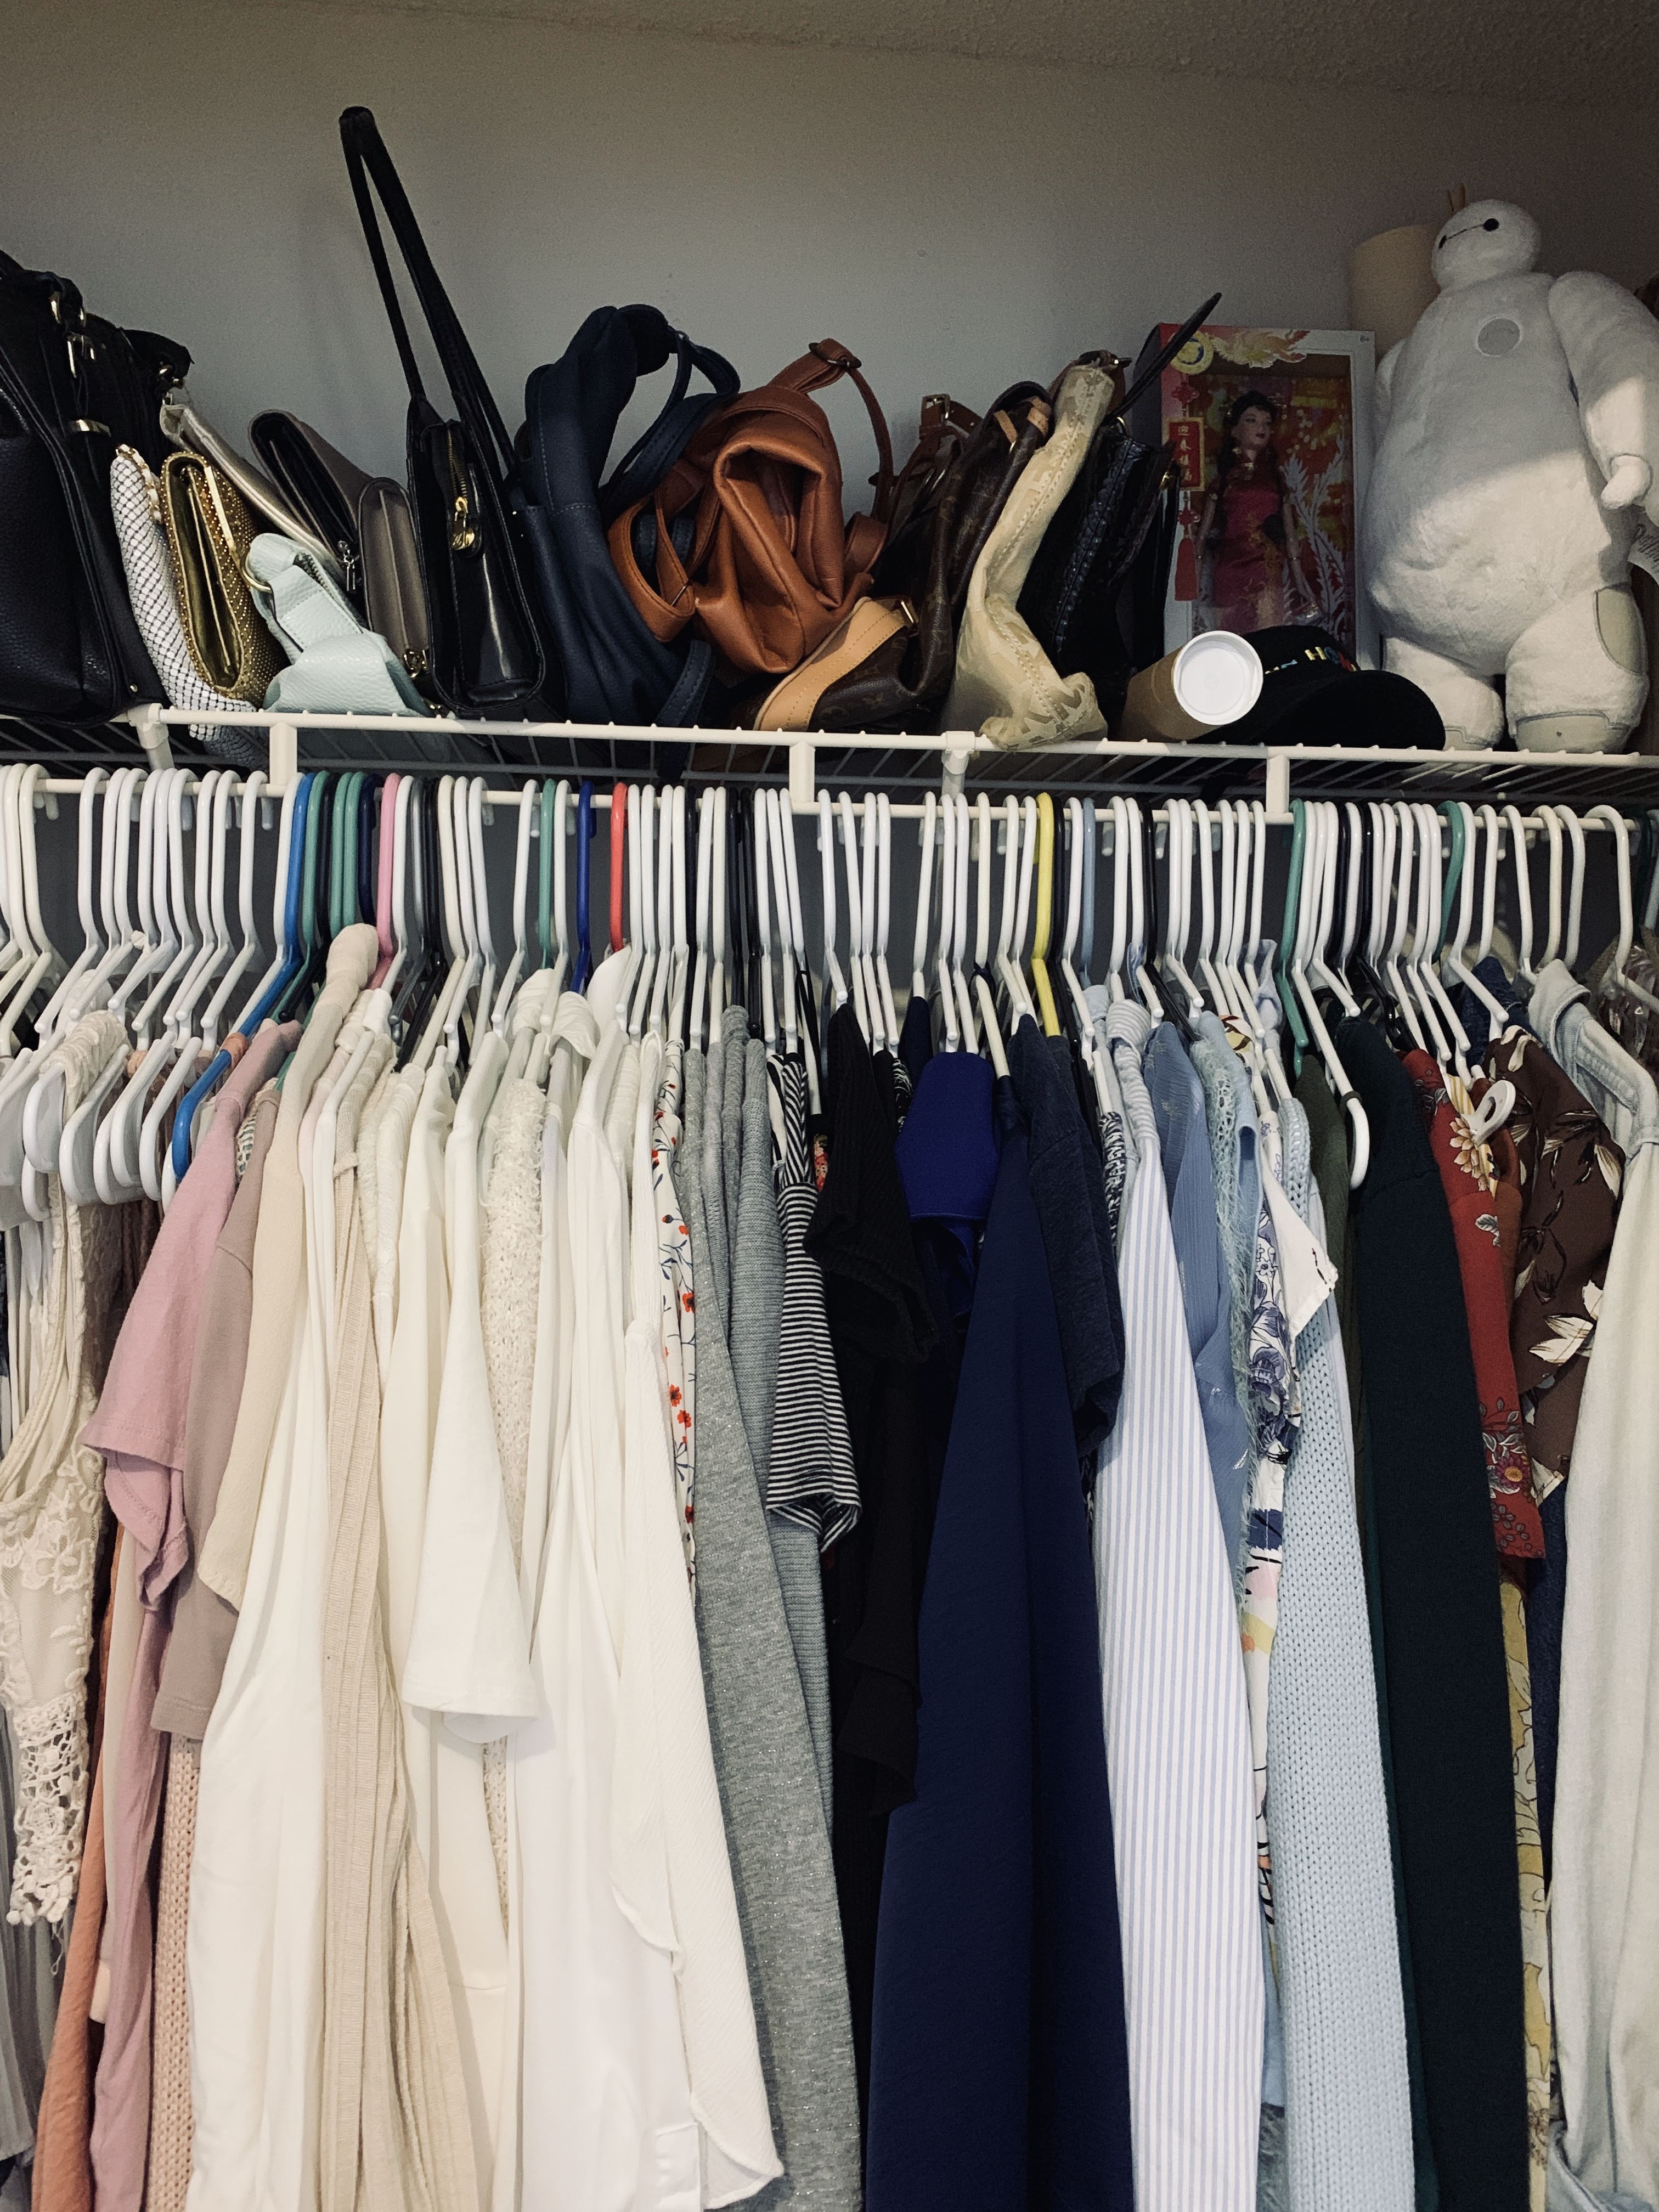 A snapshot of my closet. Thank you to my tall girlfriend who helped organize the top shelves. (Photo by DefiningAngelika)